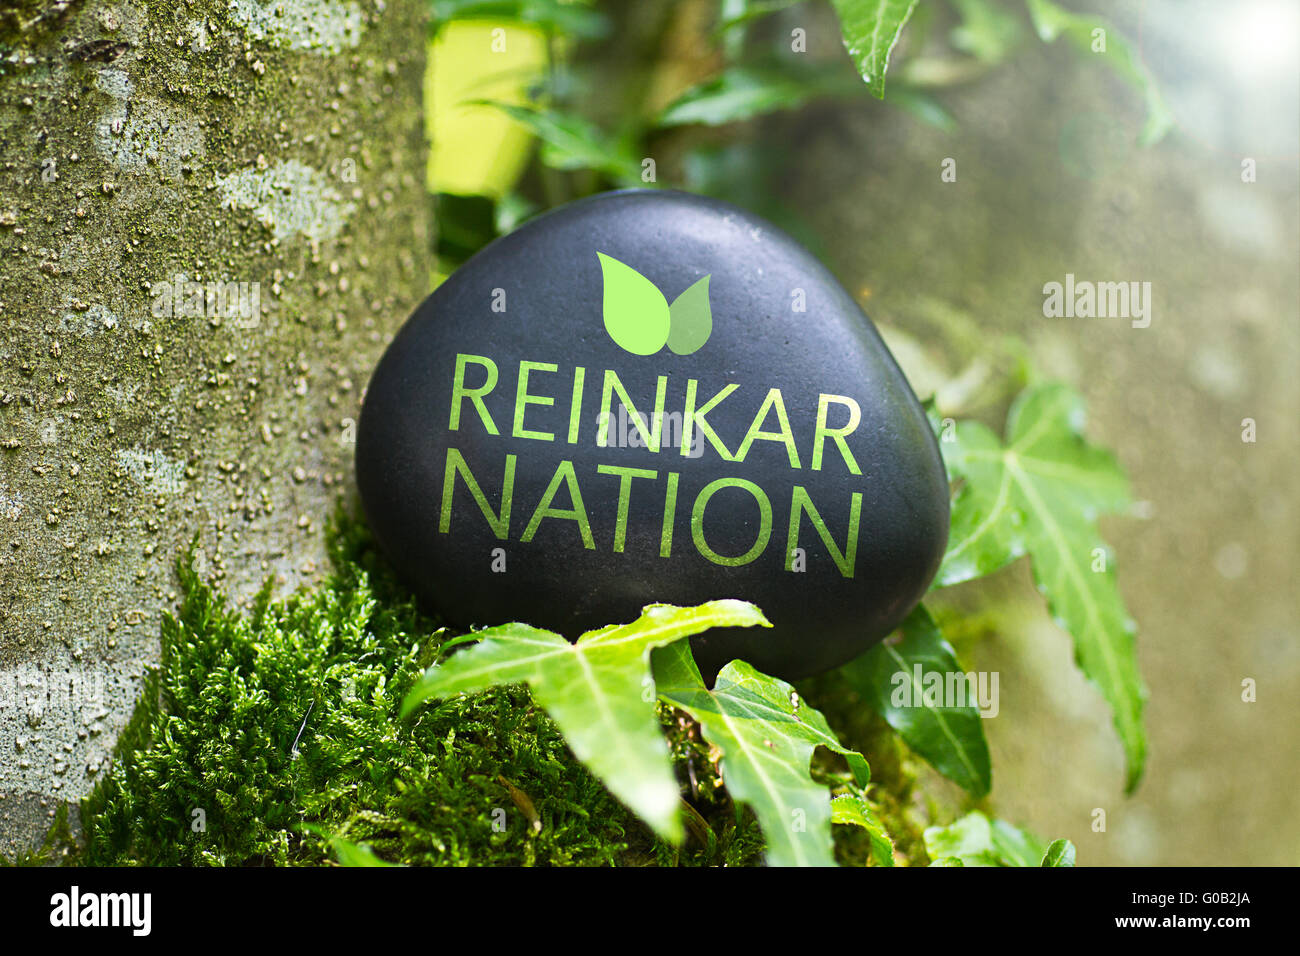 The word „Reinkarnation“ on a stone in nature Stock Photo